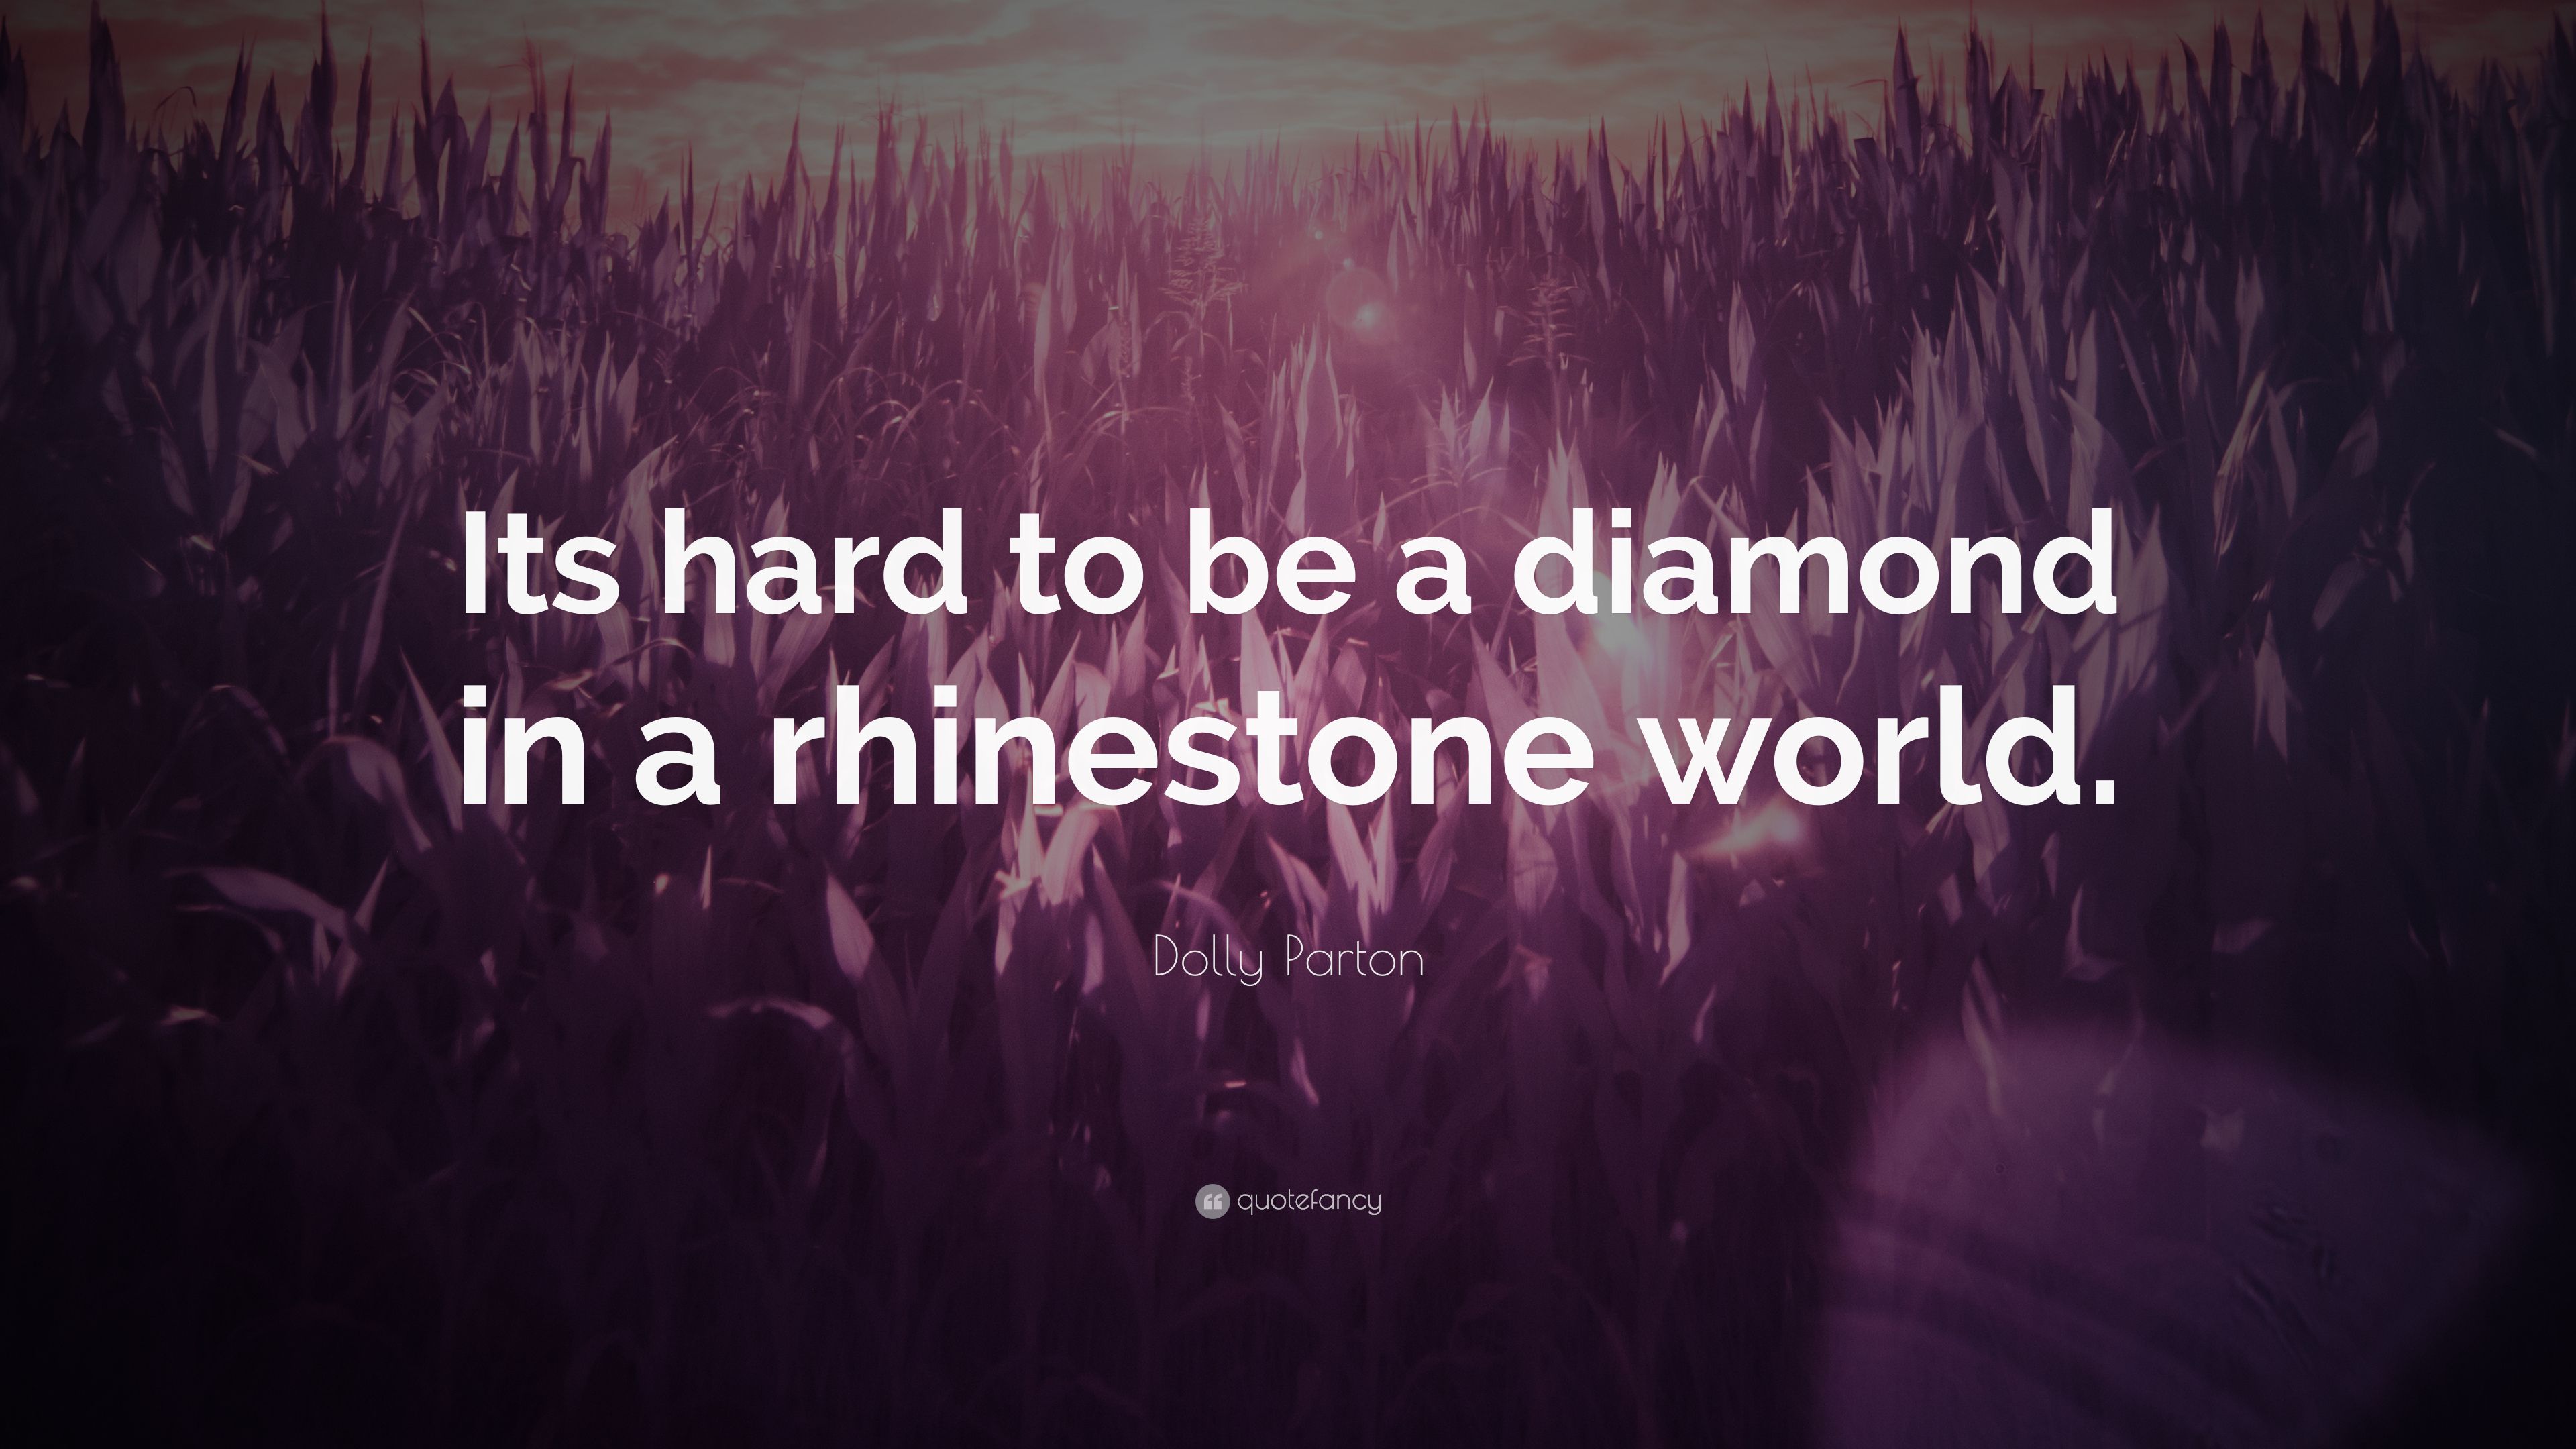 Dolly Parton Quote: “Its hard to be a diamond in a rhinestone world.” (10 wallpaper)